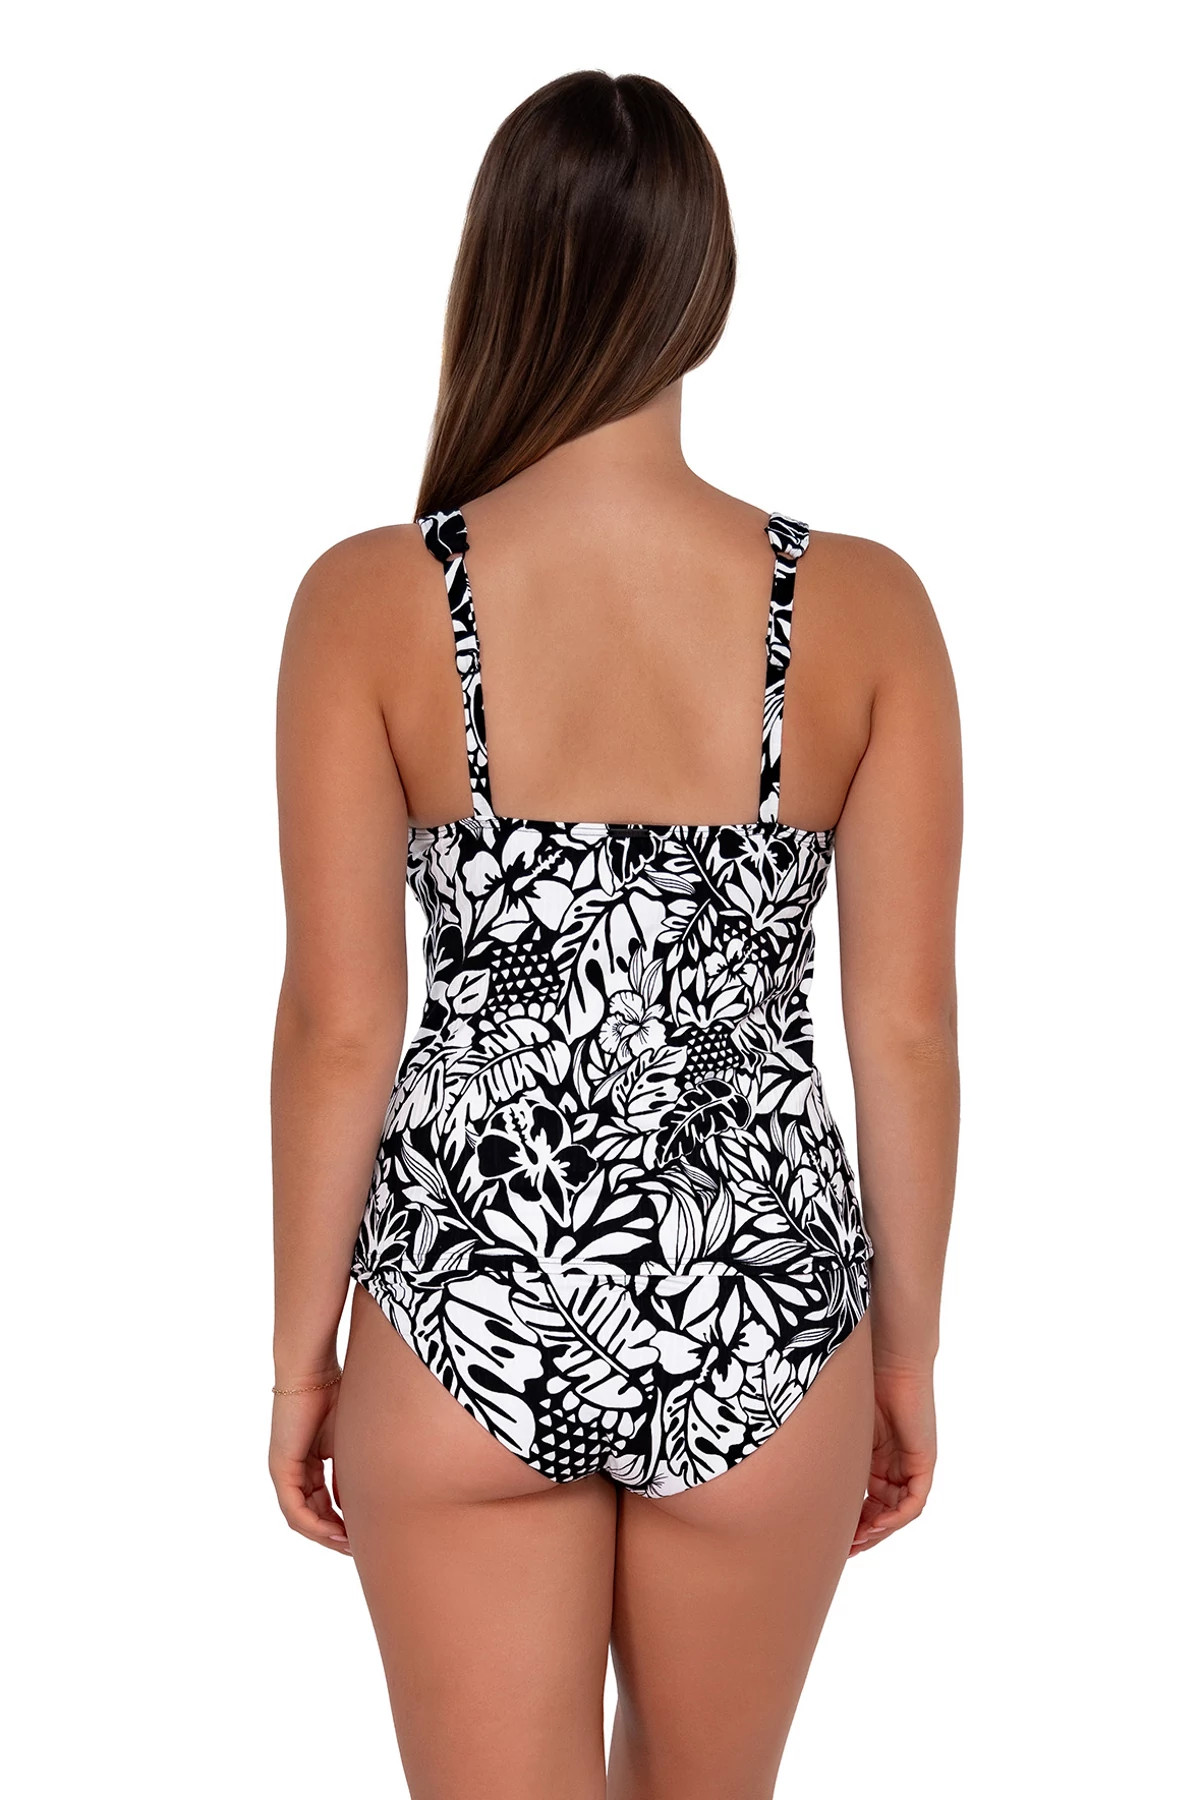 CARIBBEAN SEAGRASS TEXTURE Elsie Underwire Tankini Top (E-H Cup) image number 3